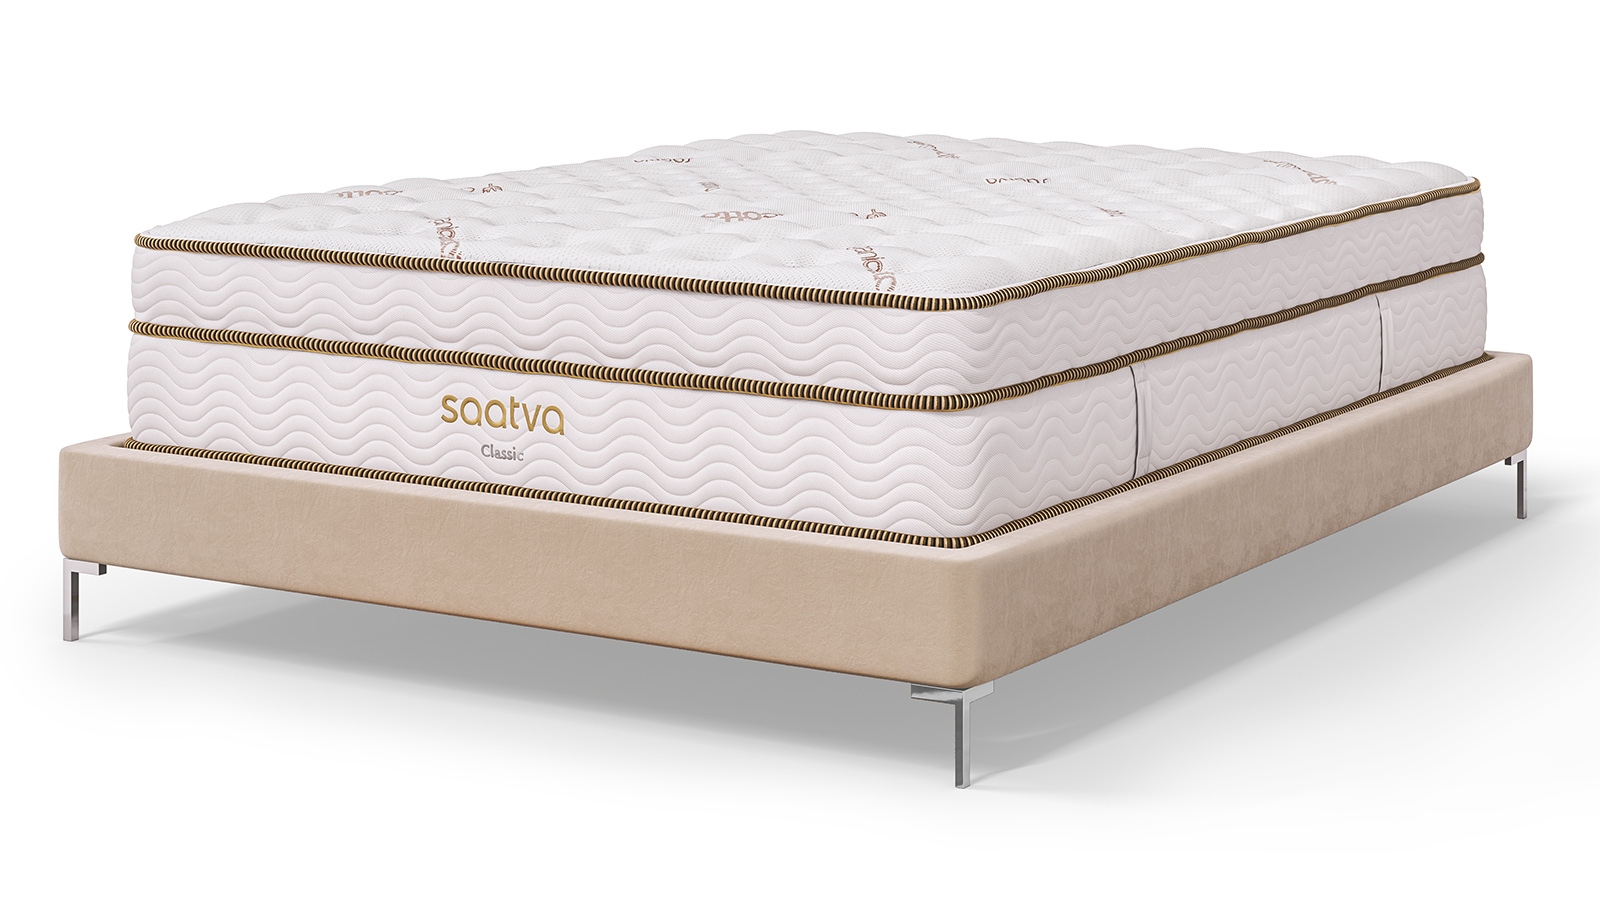 mattress sales 14850 free delivery pick up